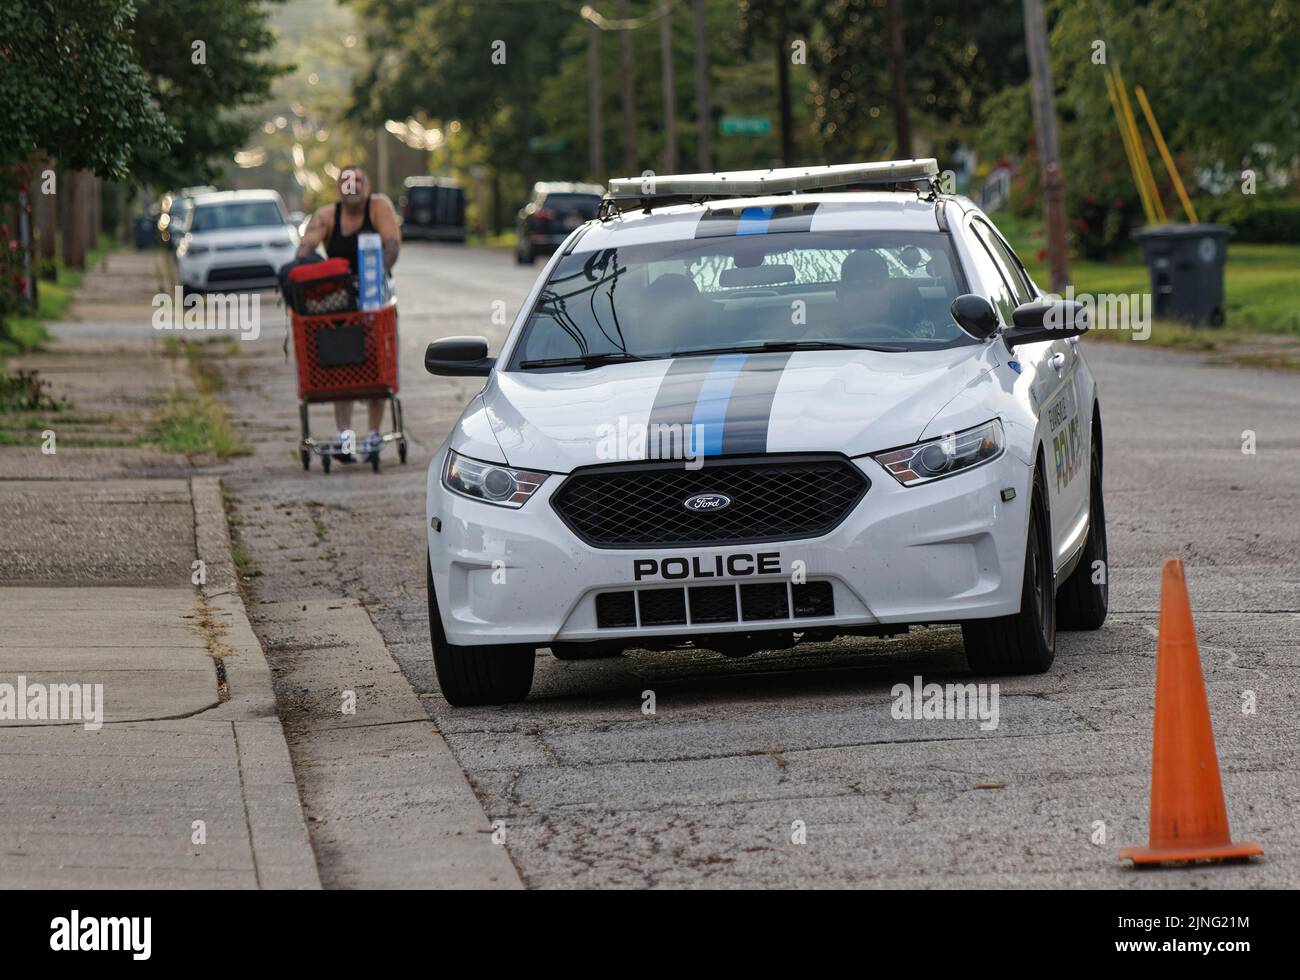 Evansville, Indiana, USA. 11 Aug 2022. An Evansville Police Department cruiser drives around a man pushing a shopping cart near the site where a house exploded the previous day, killing at least three people and damaging 39 other homes in the area. (Credit: Billy Suratt/Apex MediaWire via Alamy Live News) Stock Photo